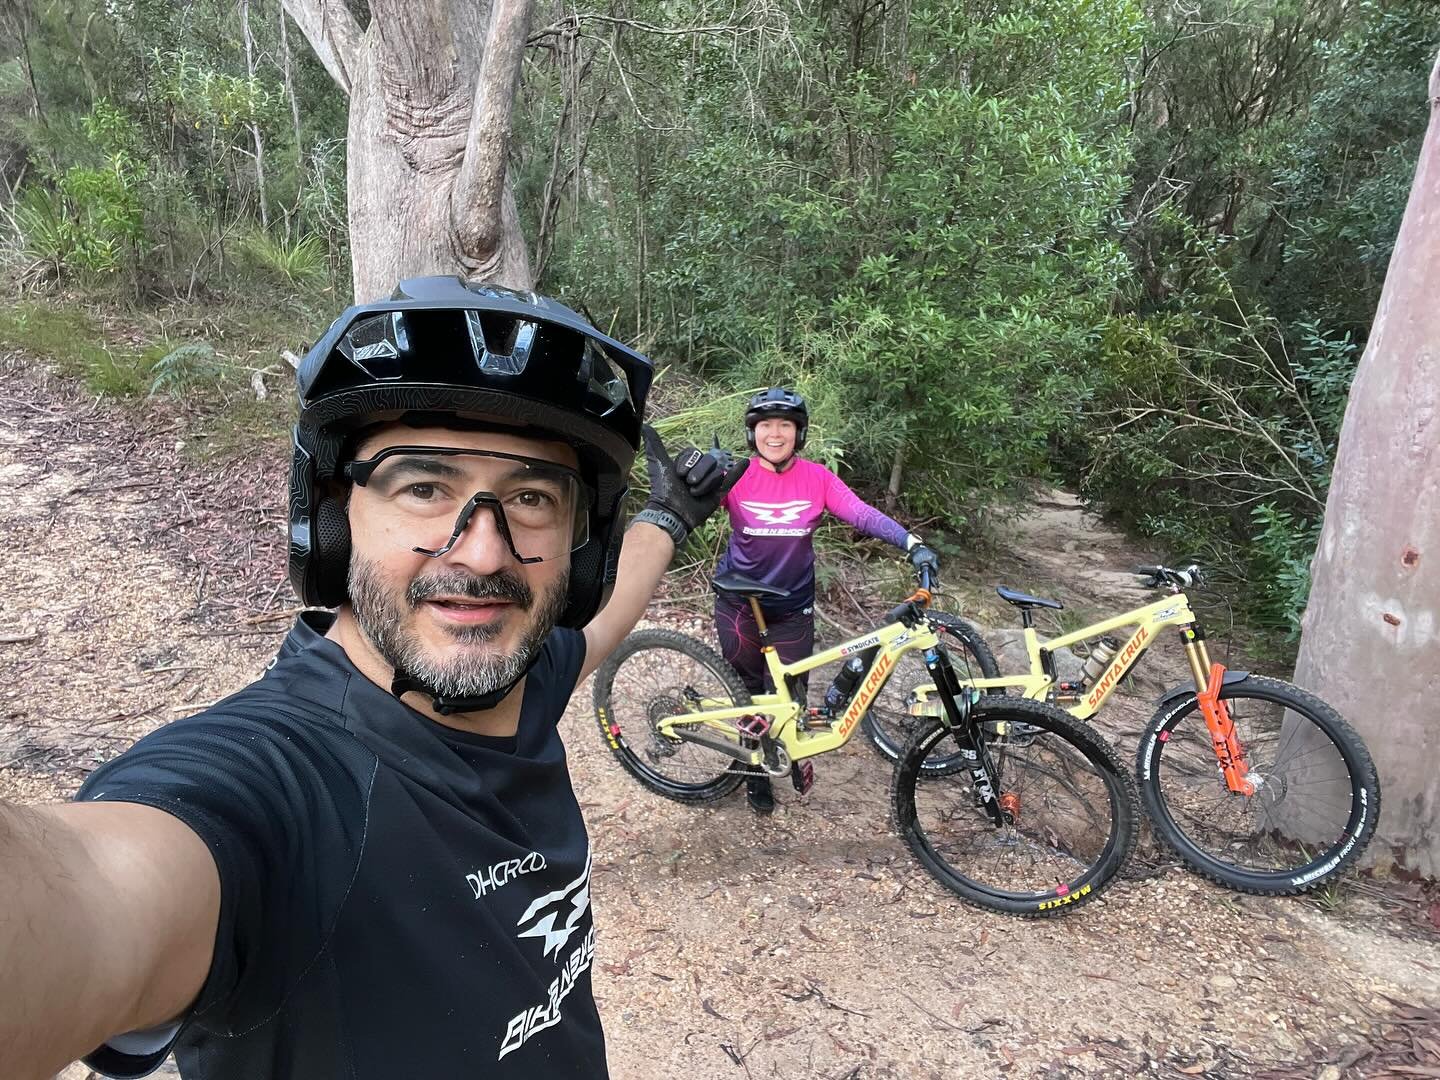 Nothing is better than a ride on the Nomad&rsquo;s at Rockies 🔥#santacruznomad #funmorningride #sydneymtb #dhride